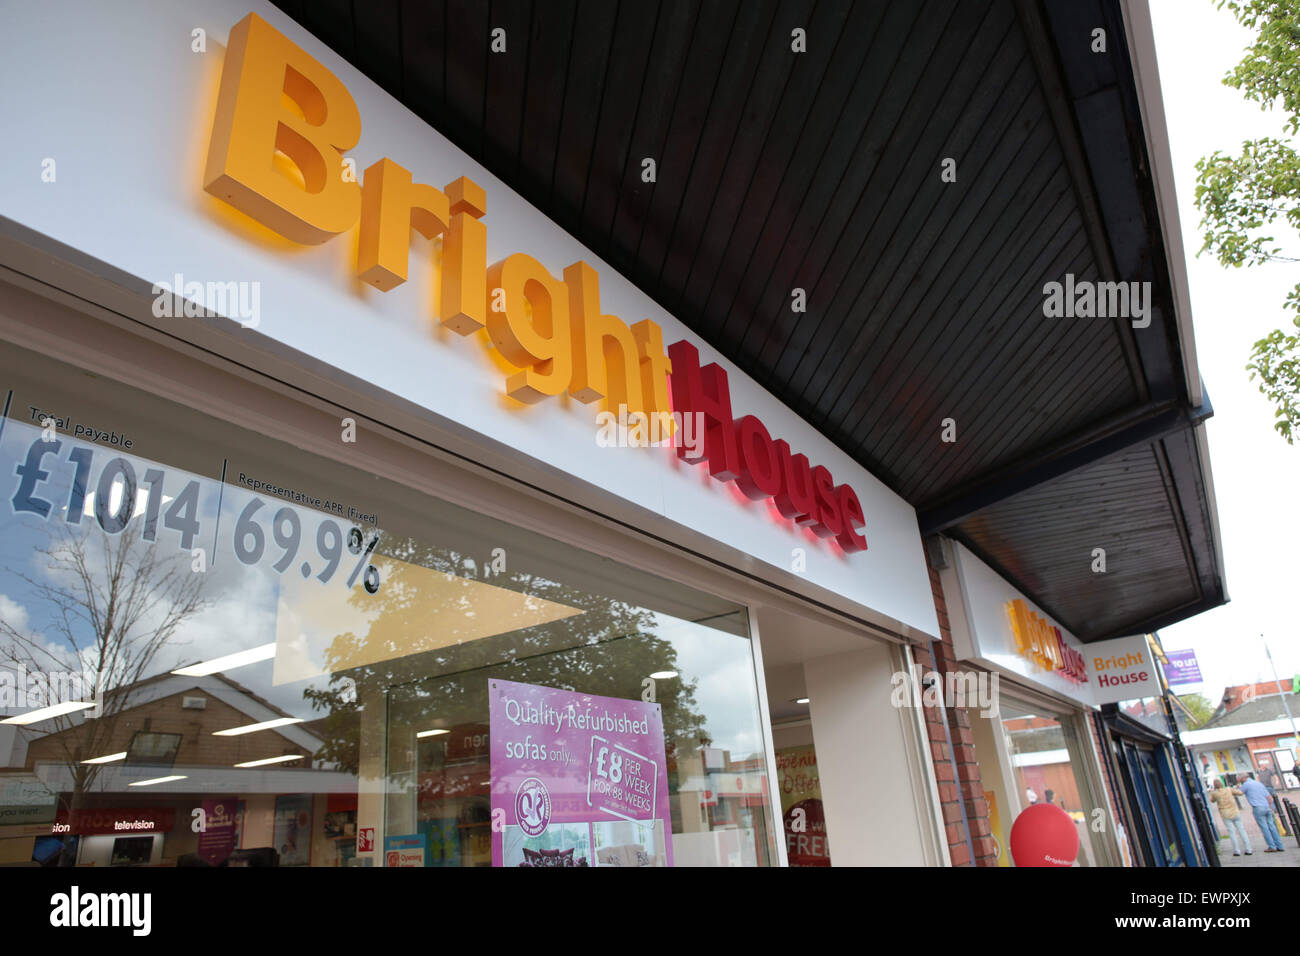 Brighthouse store front Stock Photo